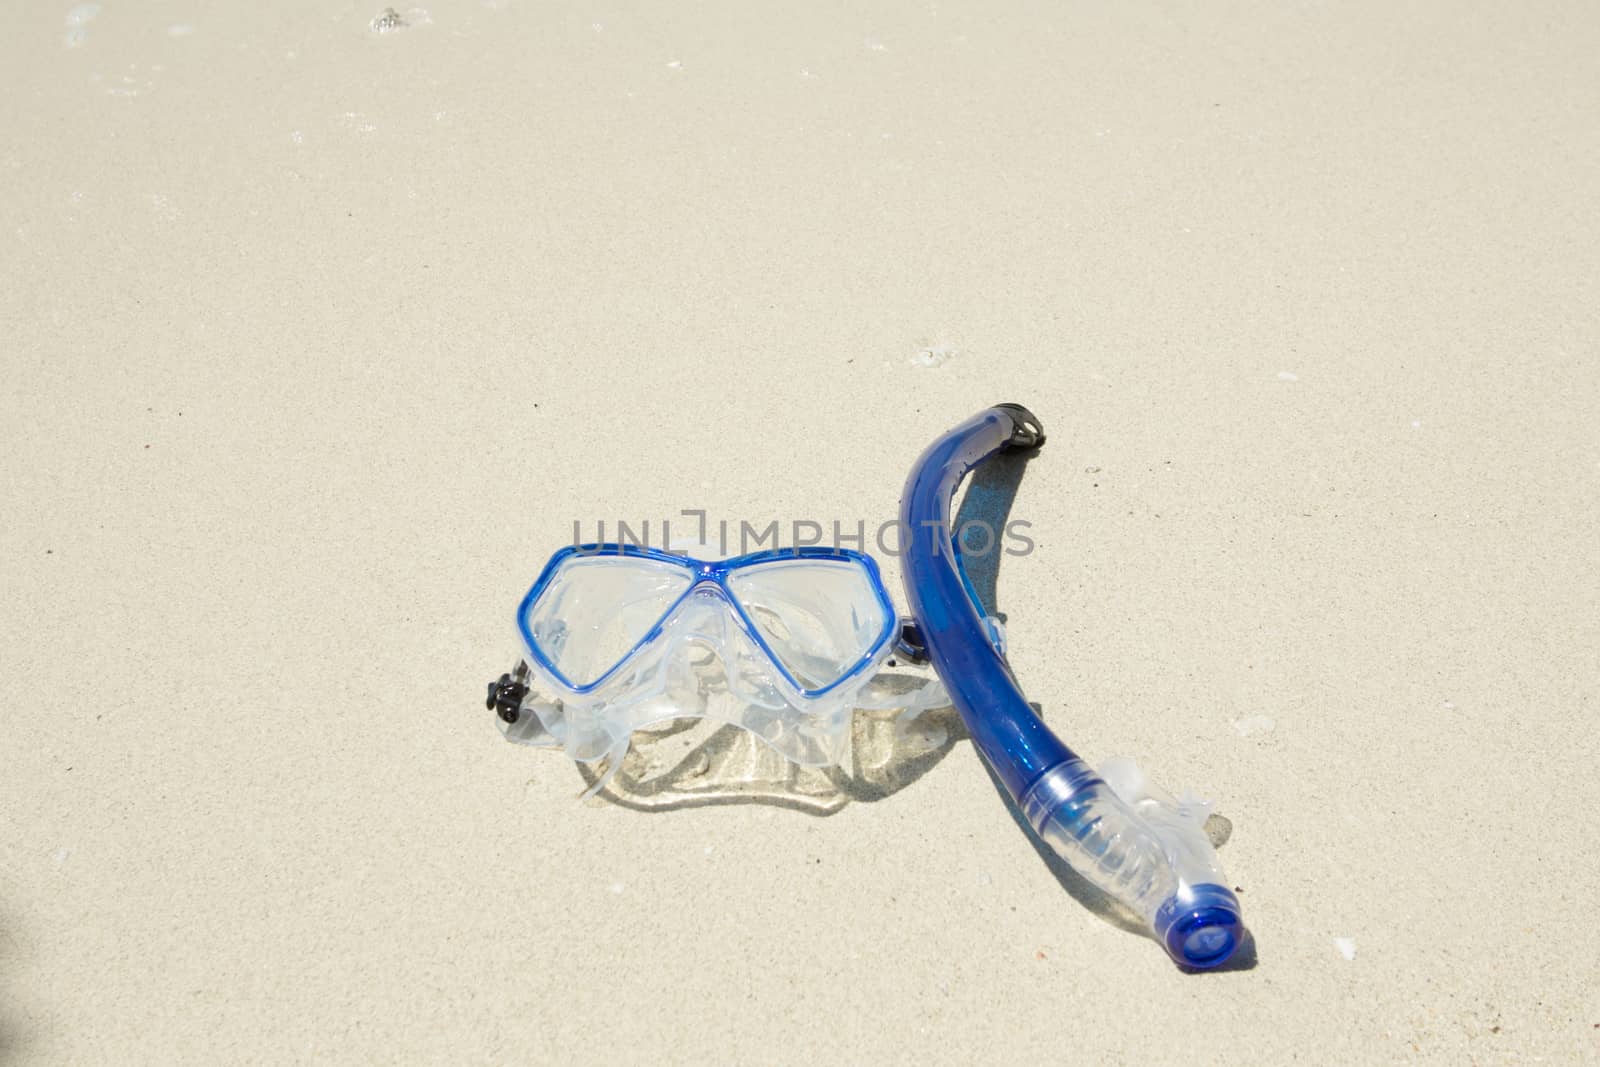 snorkel and mask on white sand background 